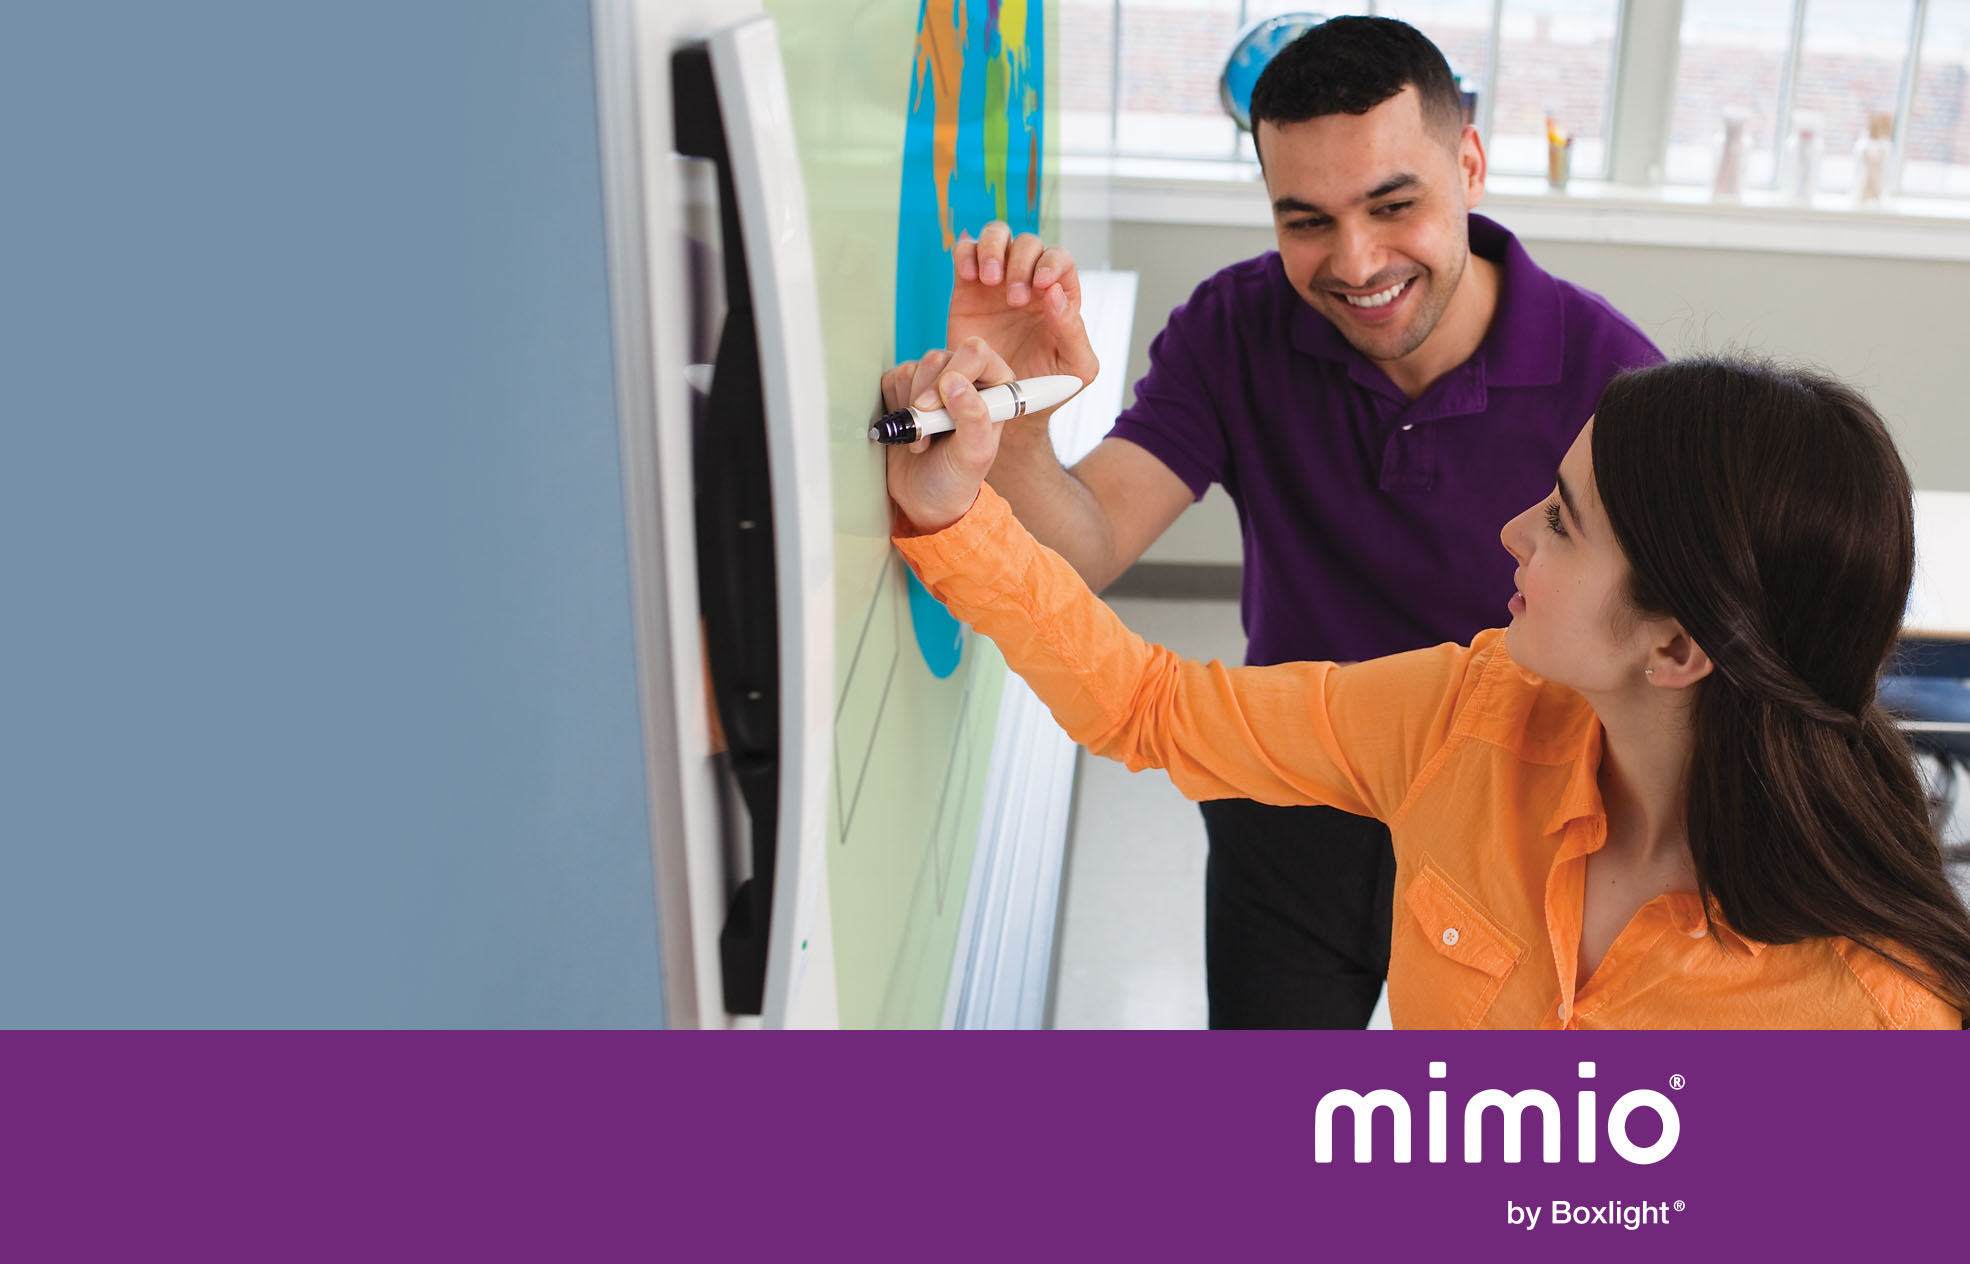 two people using a mimio Portable Interactive Whiteboard with purple banner saying 'mimio by boxlight' at the bottom